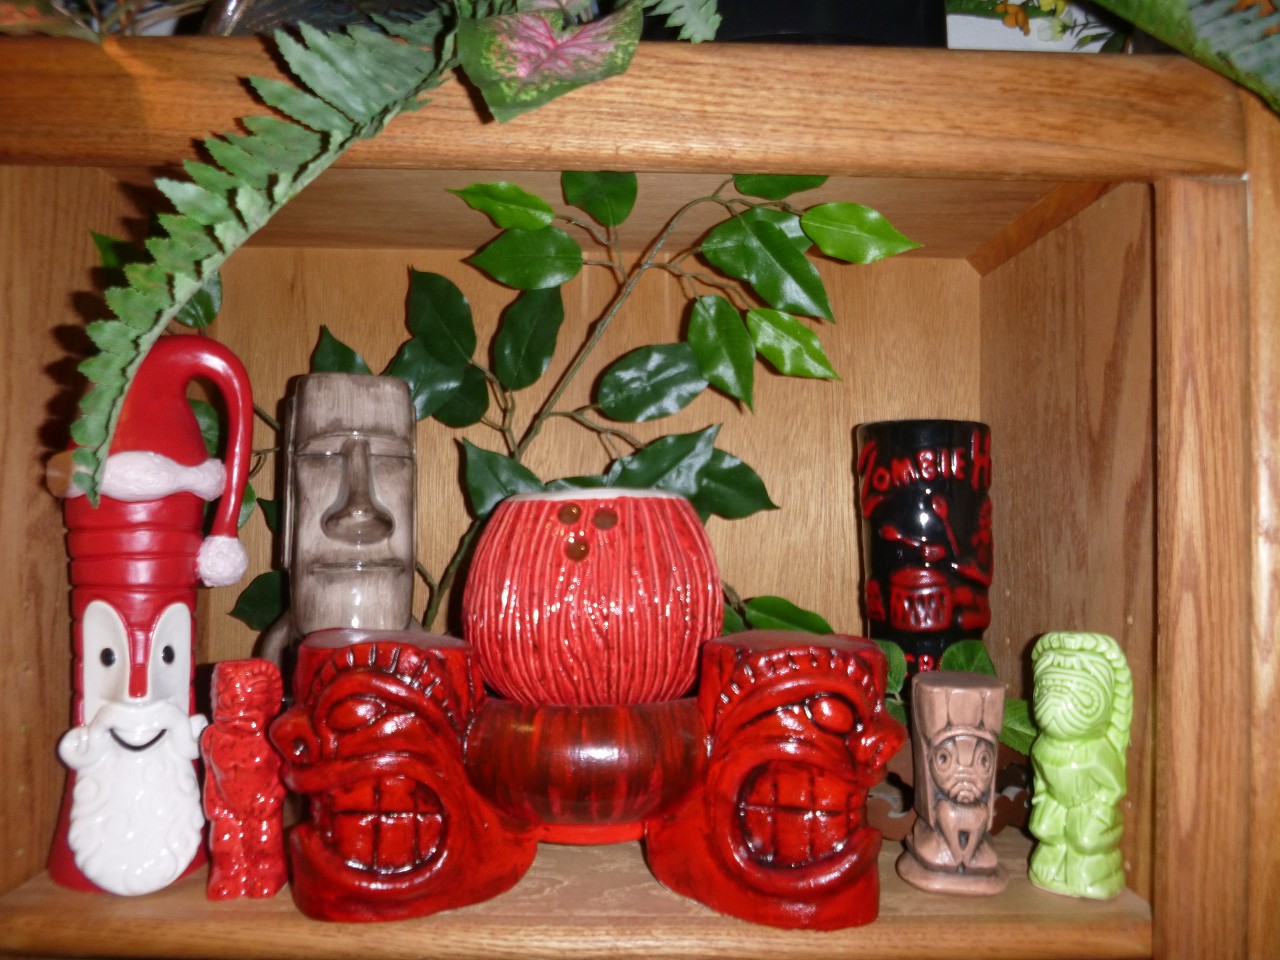 Nook redone and Zombie mugs into jungle room 7 19 23 on fb tc (15)